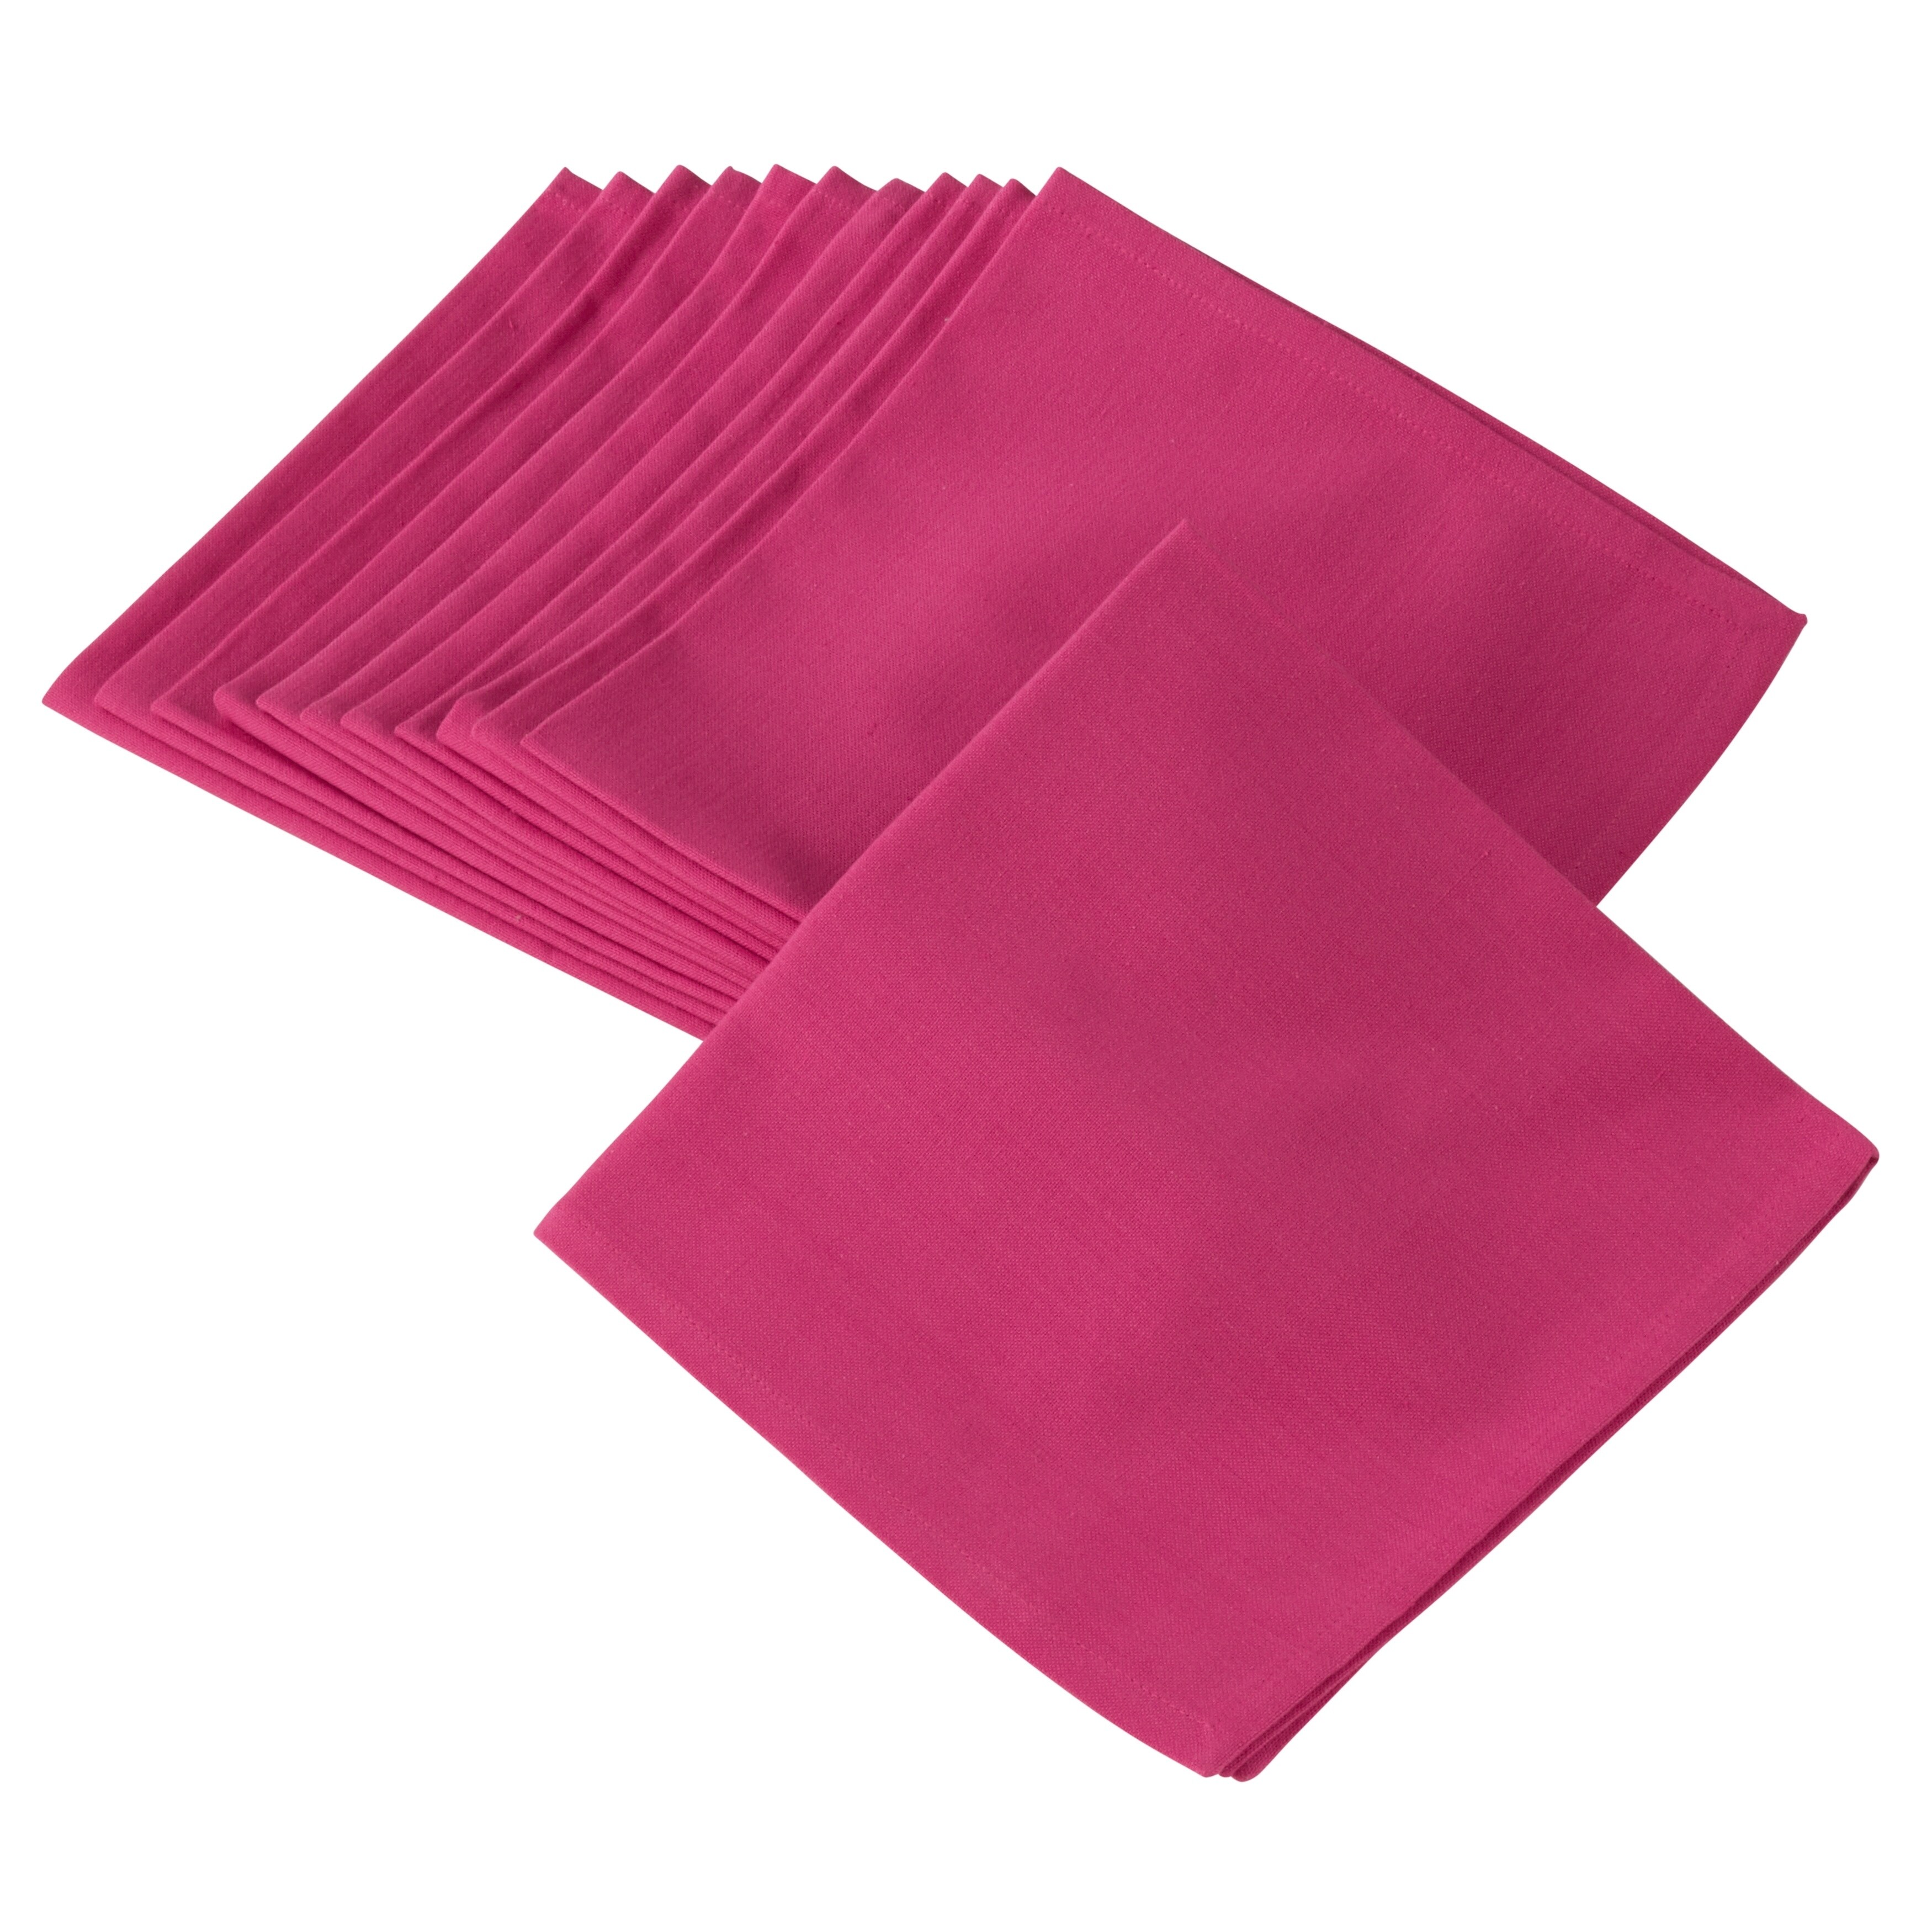 https://ak1.ostkcdn.com/images/products/22736454/100-Cotton-Square-Dinner-Napkins-In-Solid-Colors-Set-of-12-5f0964fe-cfea-496f-a734-10e9c45b2ca3.jpg